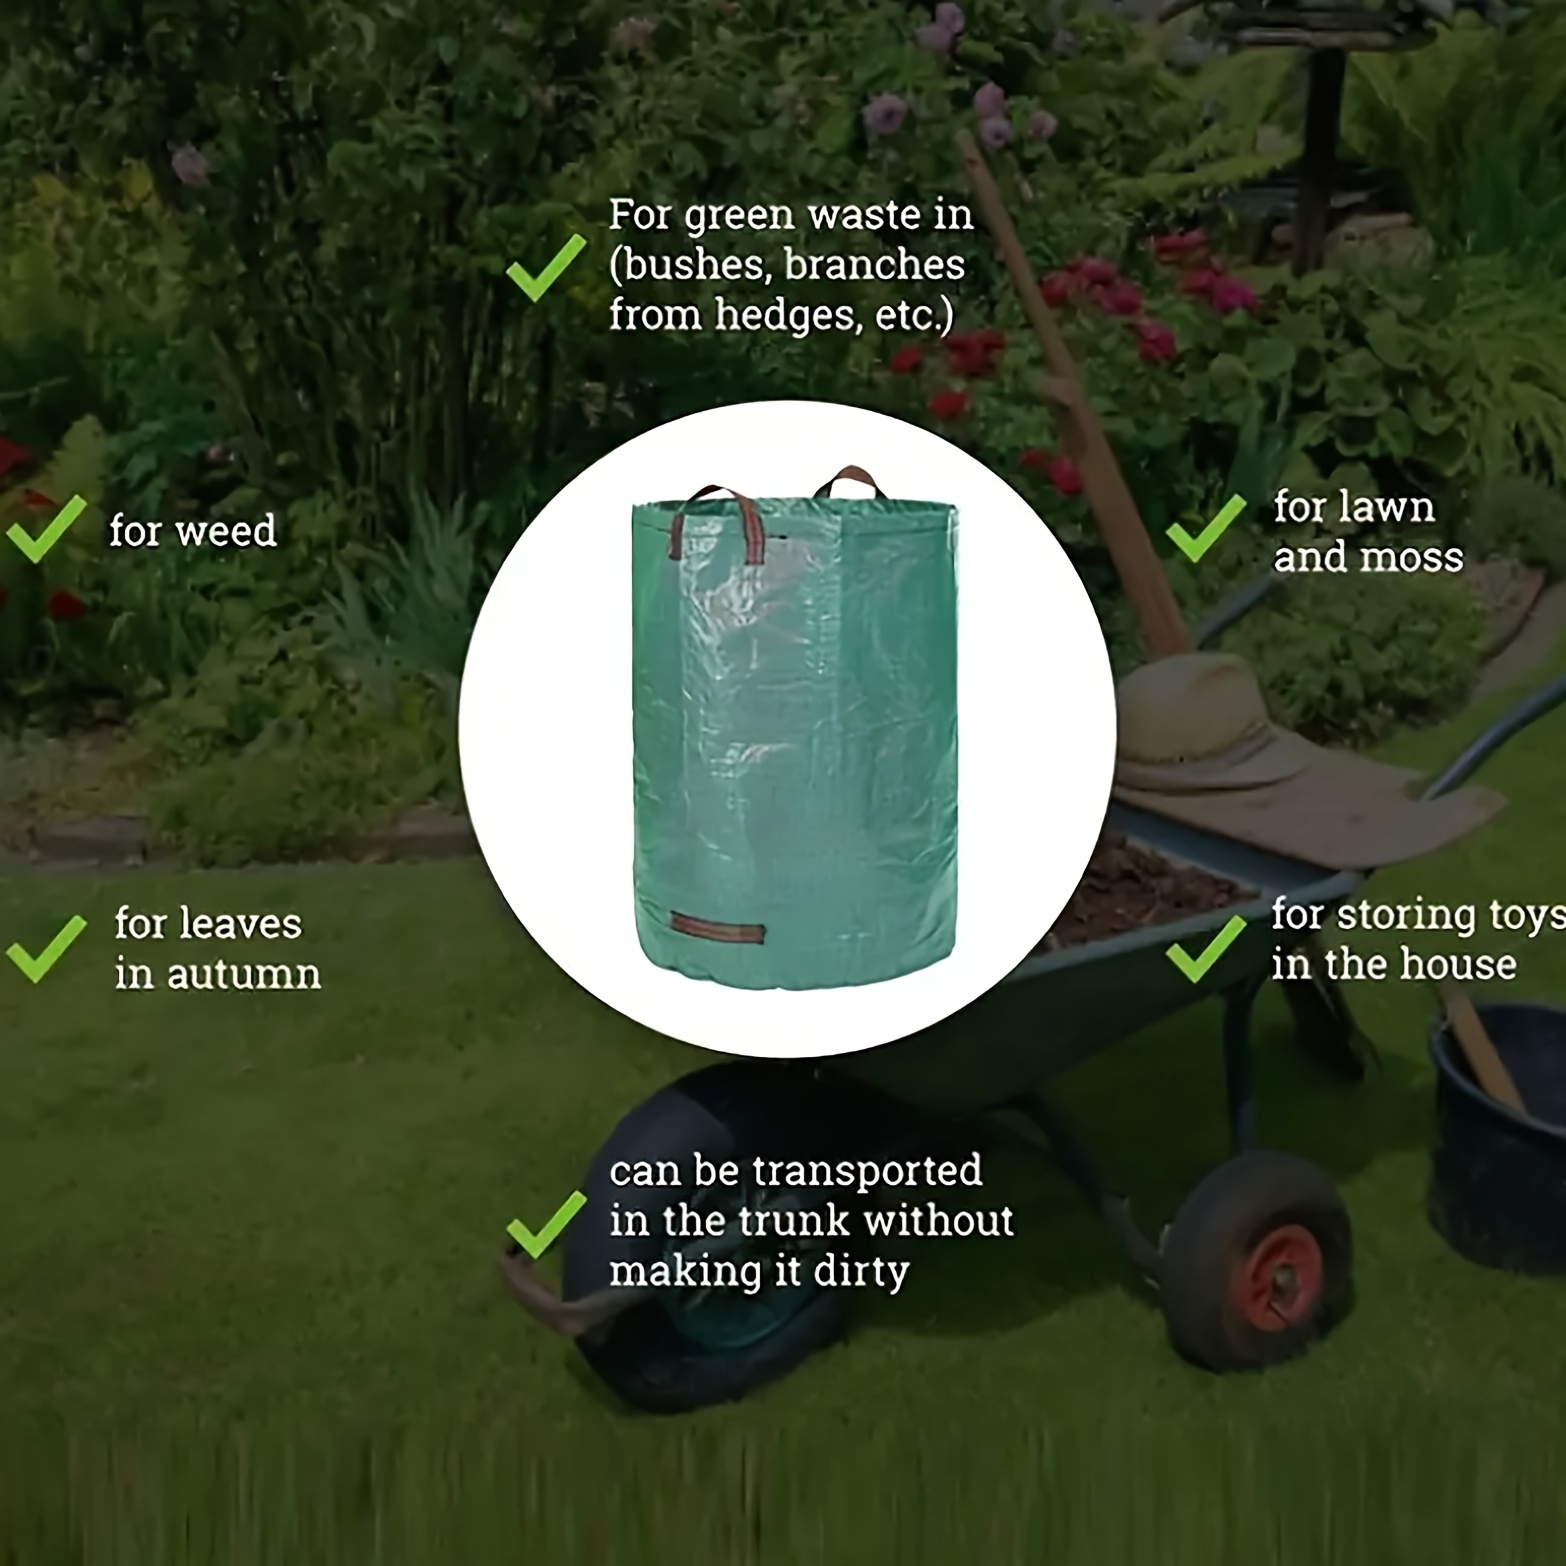 Reusable Leaf Bags, 80 Gallons Lawn Bags, Yard Waste Bags Heavy Duty, Extra  Large Lawn Pool Garden Leaf Waste Bags,Garden Bag for Collecting Leaves,Gardening  Clippings Bags,Leaf Container,Trash Bags 